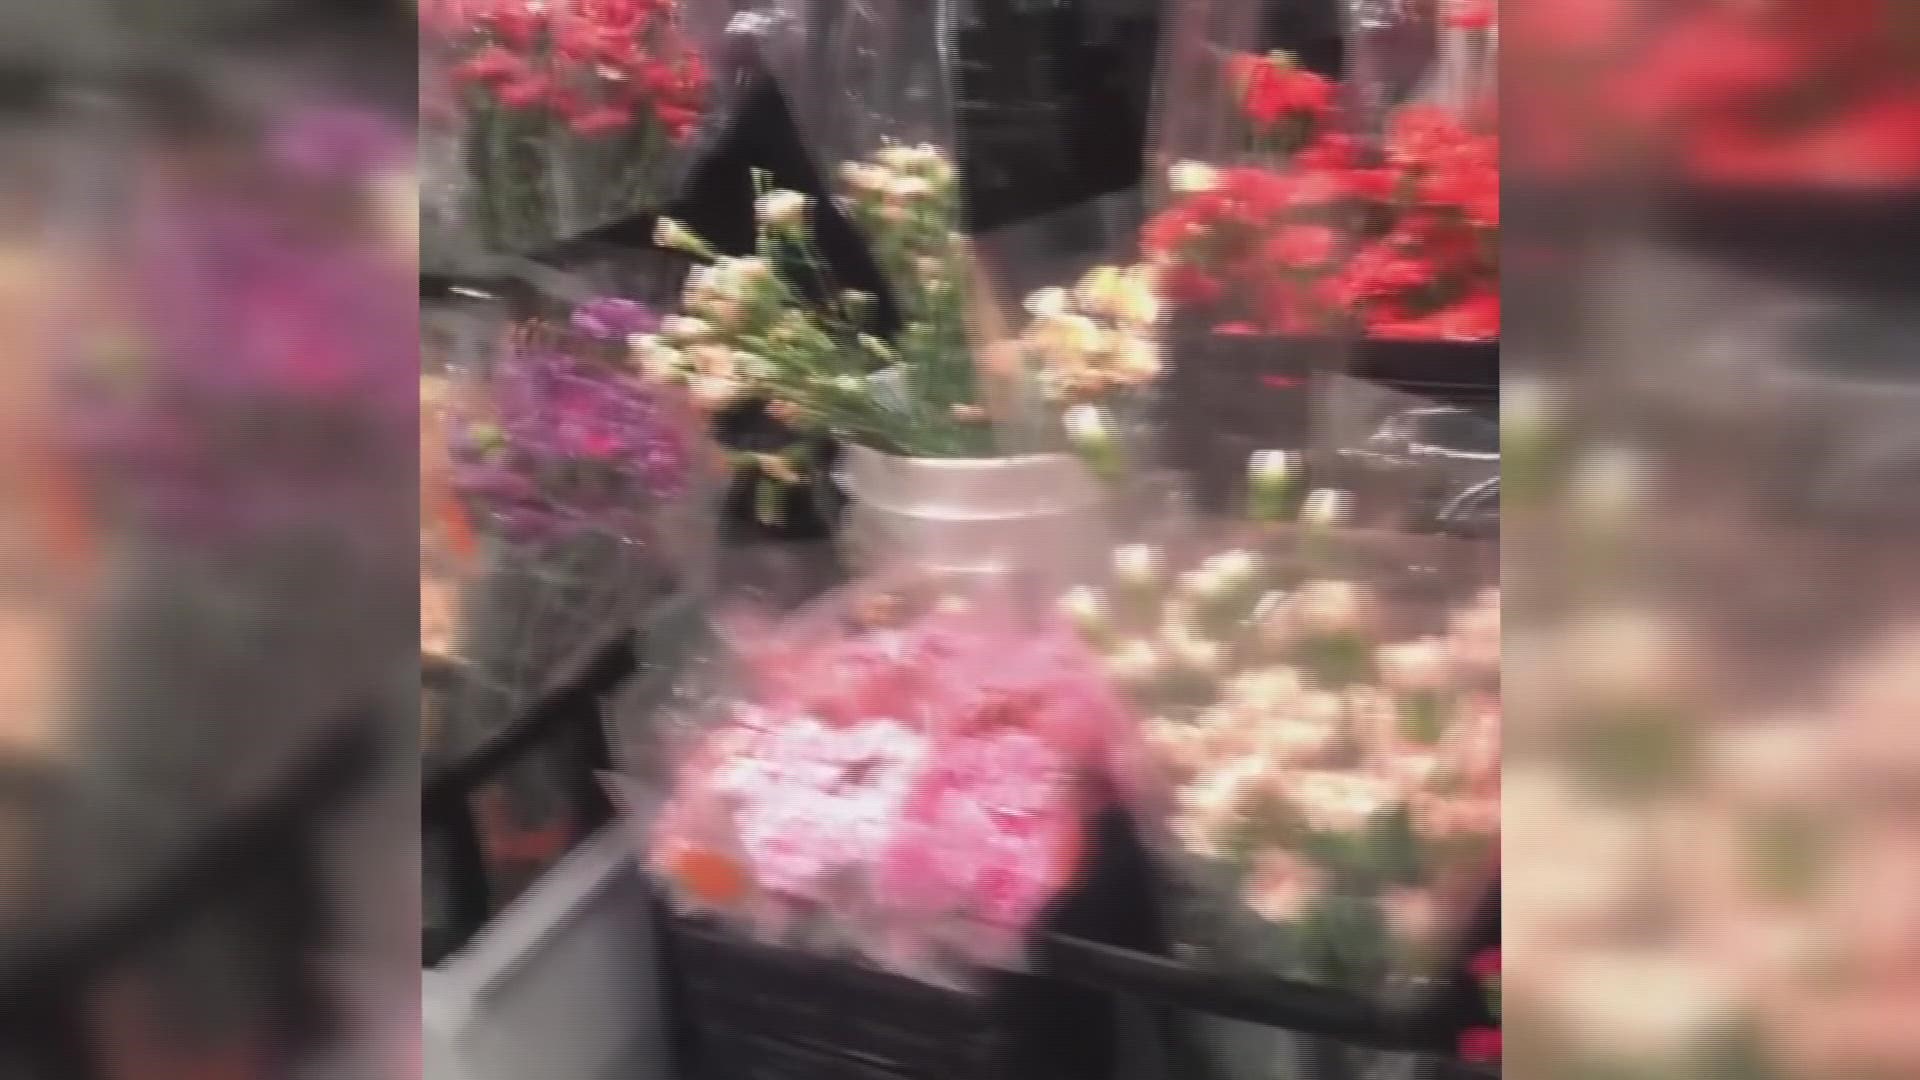 The owner of Jacksonville Flower Market has received 200 pre-orders.